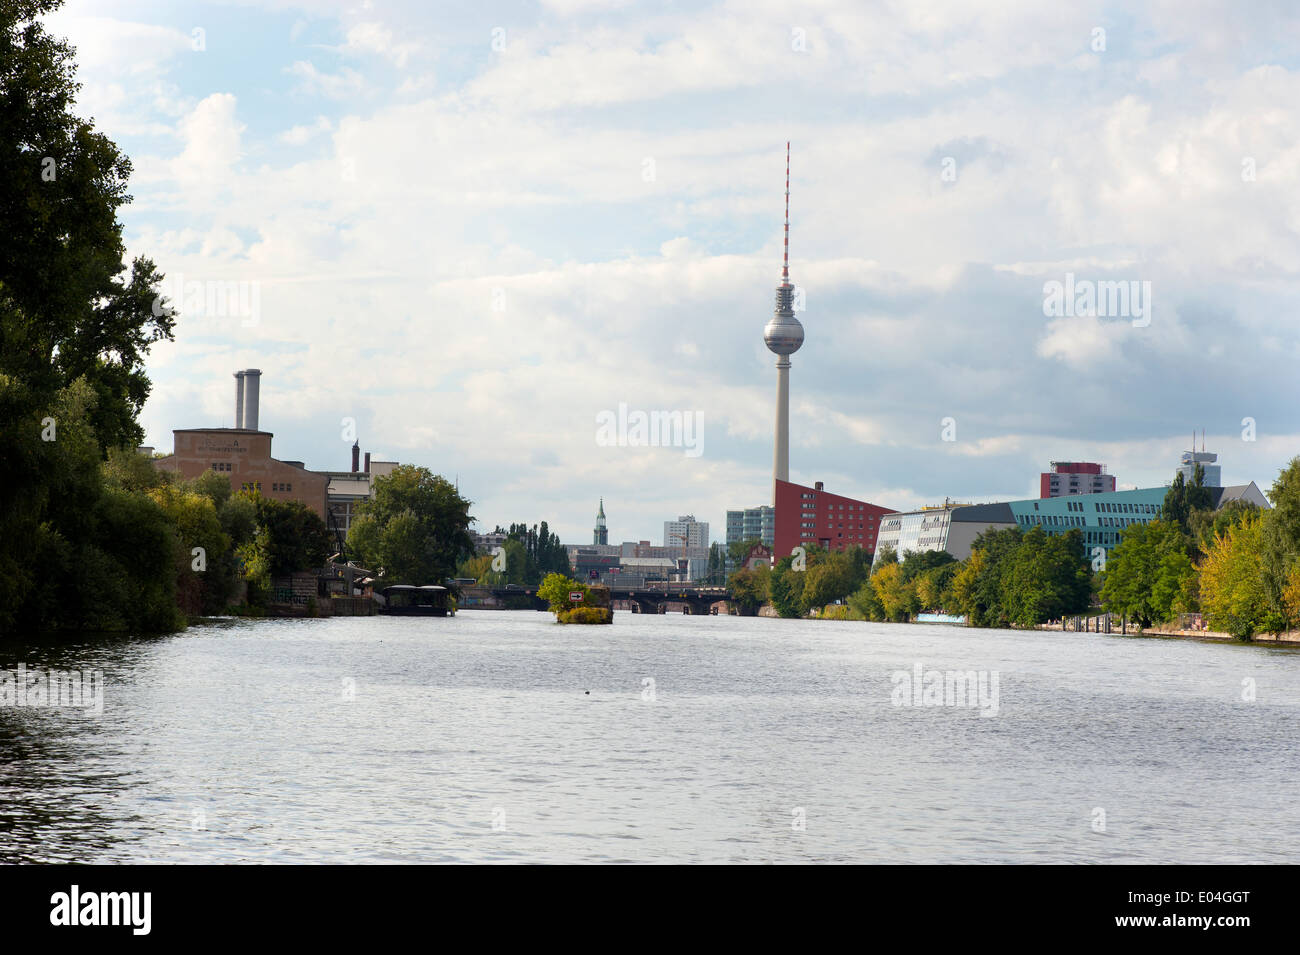 A perspective, view up the river Spree with the Berlin TV tower in the background - Called the funkturm in Berlin Stock Photo